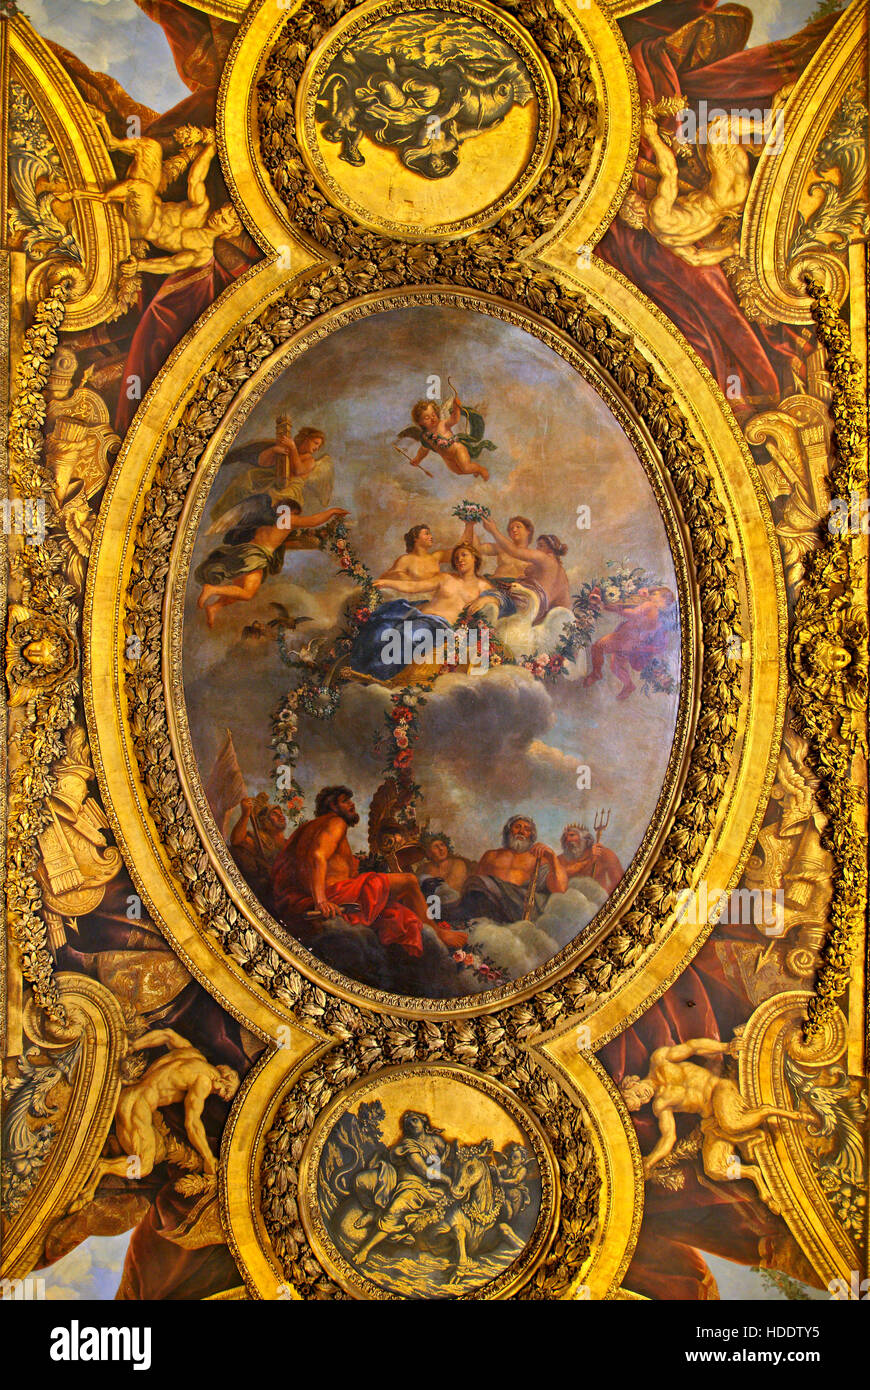 Beautiful fresco on the ceiling of 'Salon de Venus' in the Grand Appartements of the King, in the Palace of Versailles, France. Stock Photo